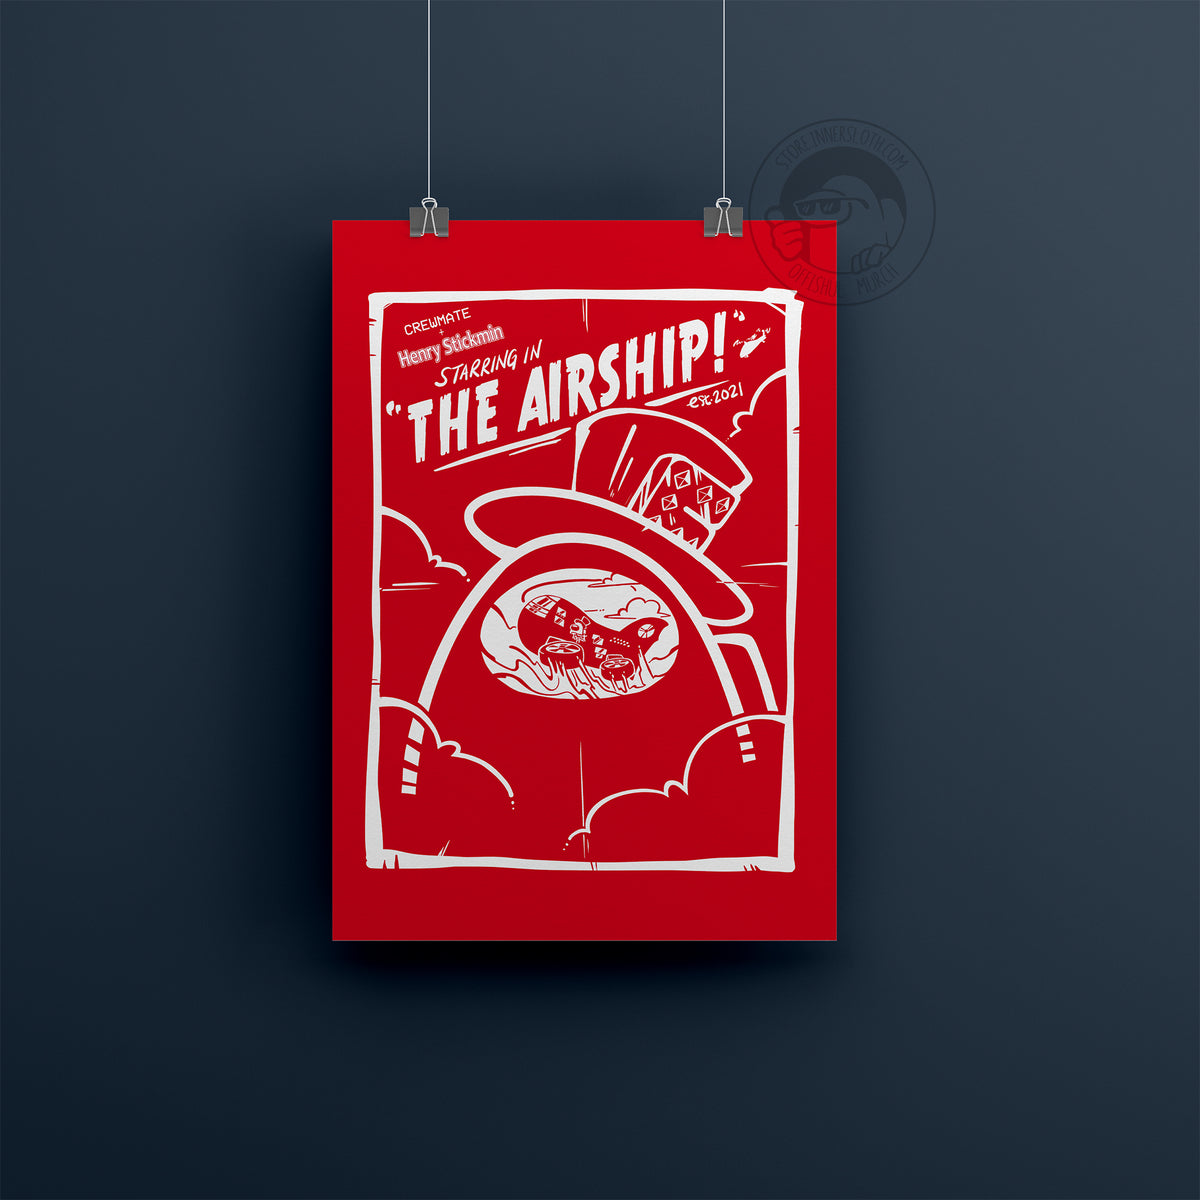 A product photo of the Among Us: The Airship Poster. The poster is red with a printed white design advertising “Henry Stickmin, Starring in ‘The Airship!’” A large crewmate in a top hat has the airship reflected in its visor.